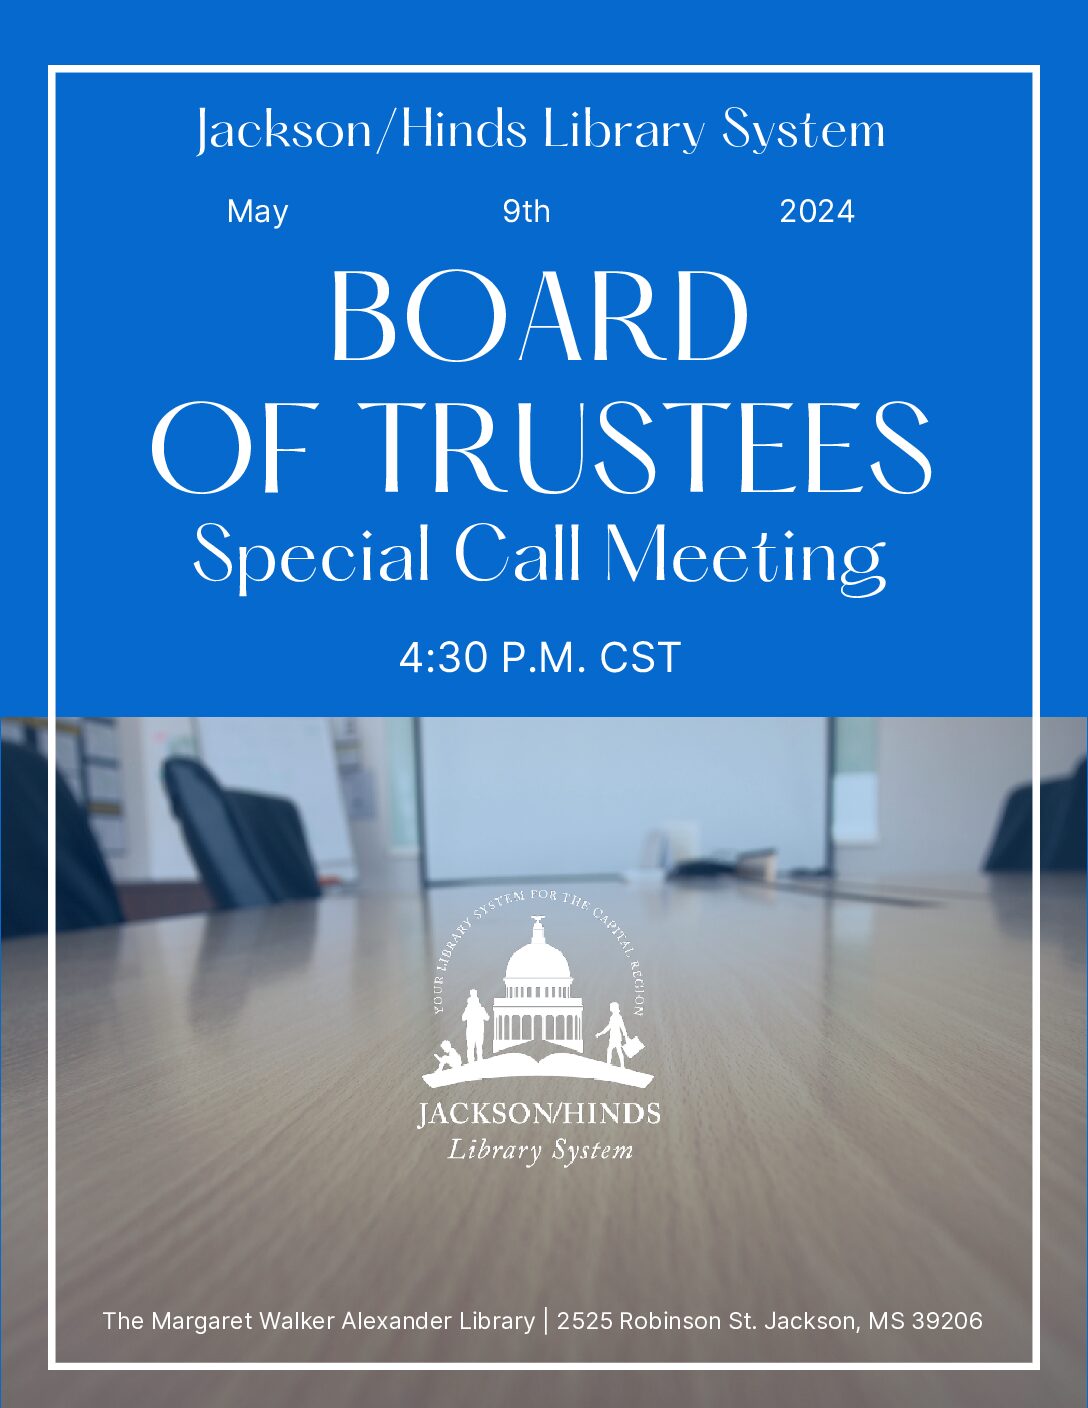 Special Call Board of Trustees Meeting at the M.W. Alexander Library on May 9th